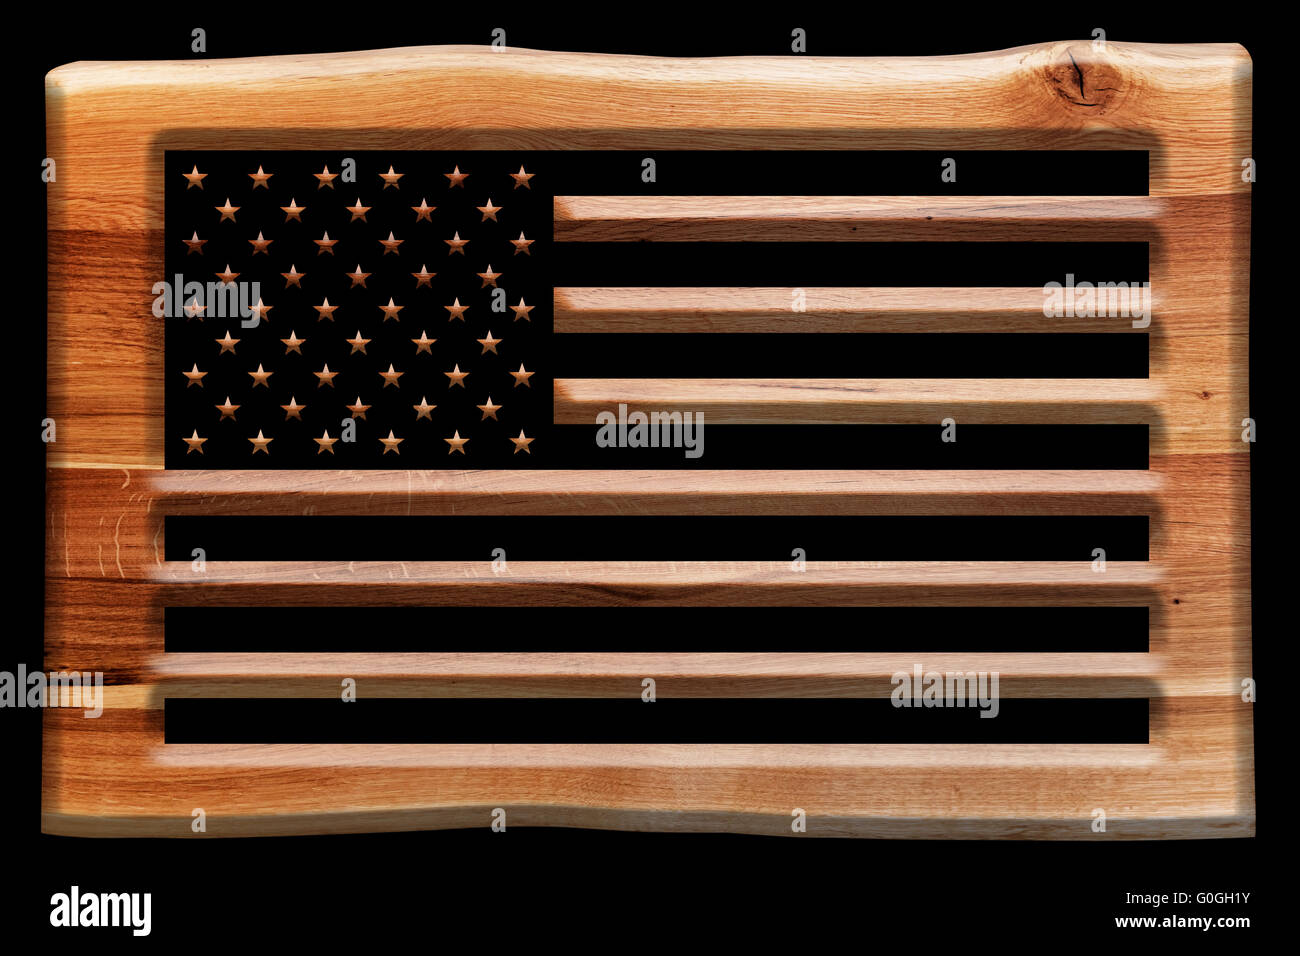 The USA flag cut in a wooden board, plate isolated on black. Stock Photo